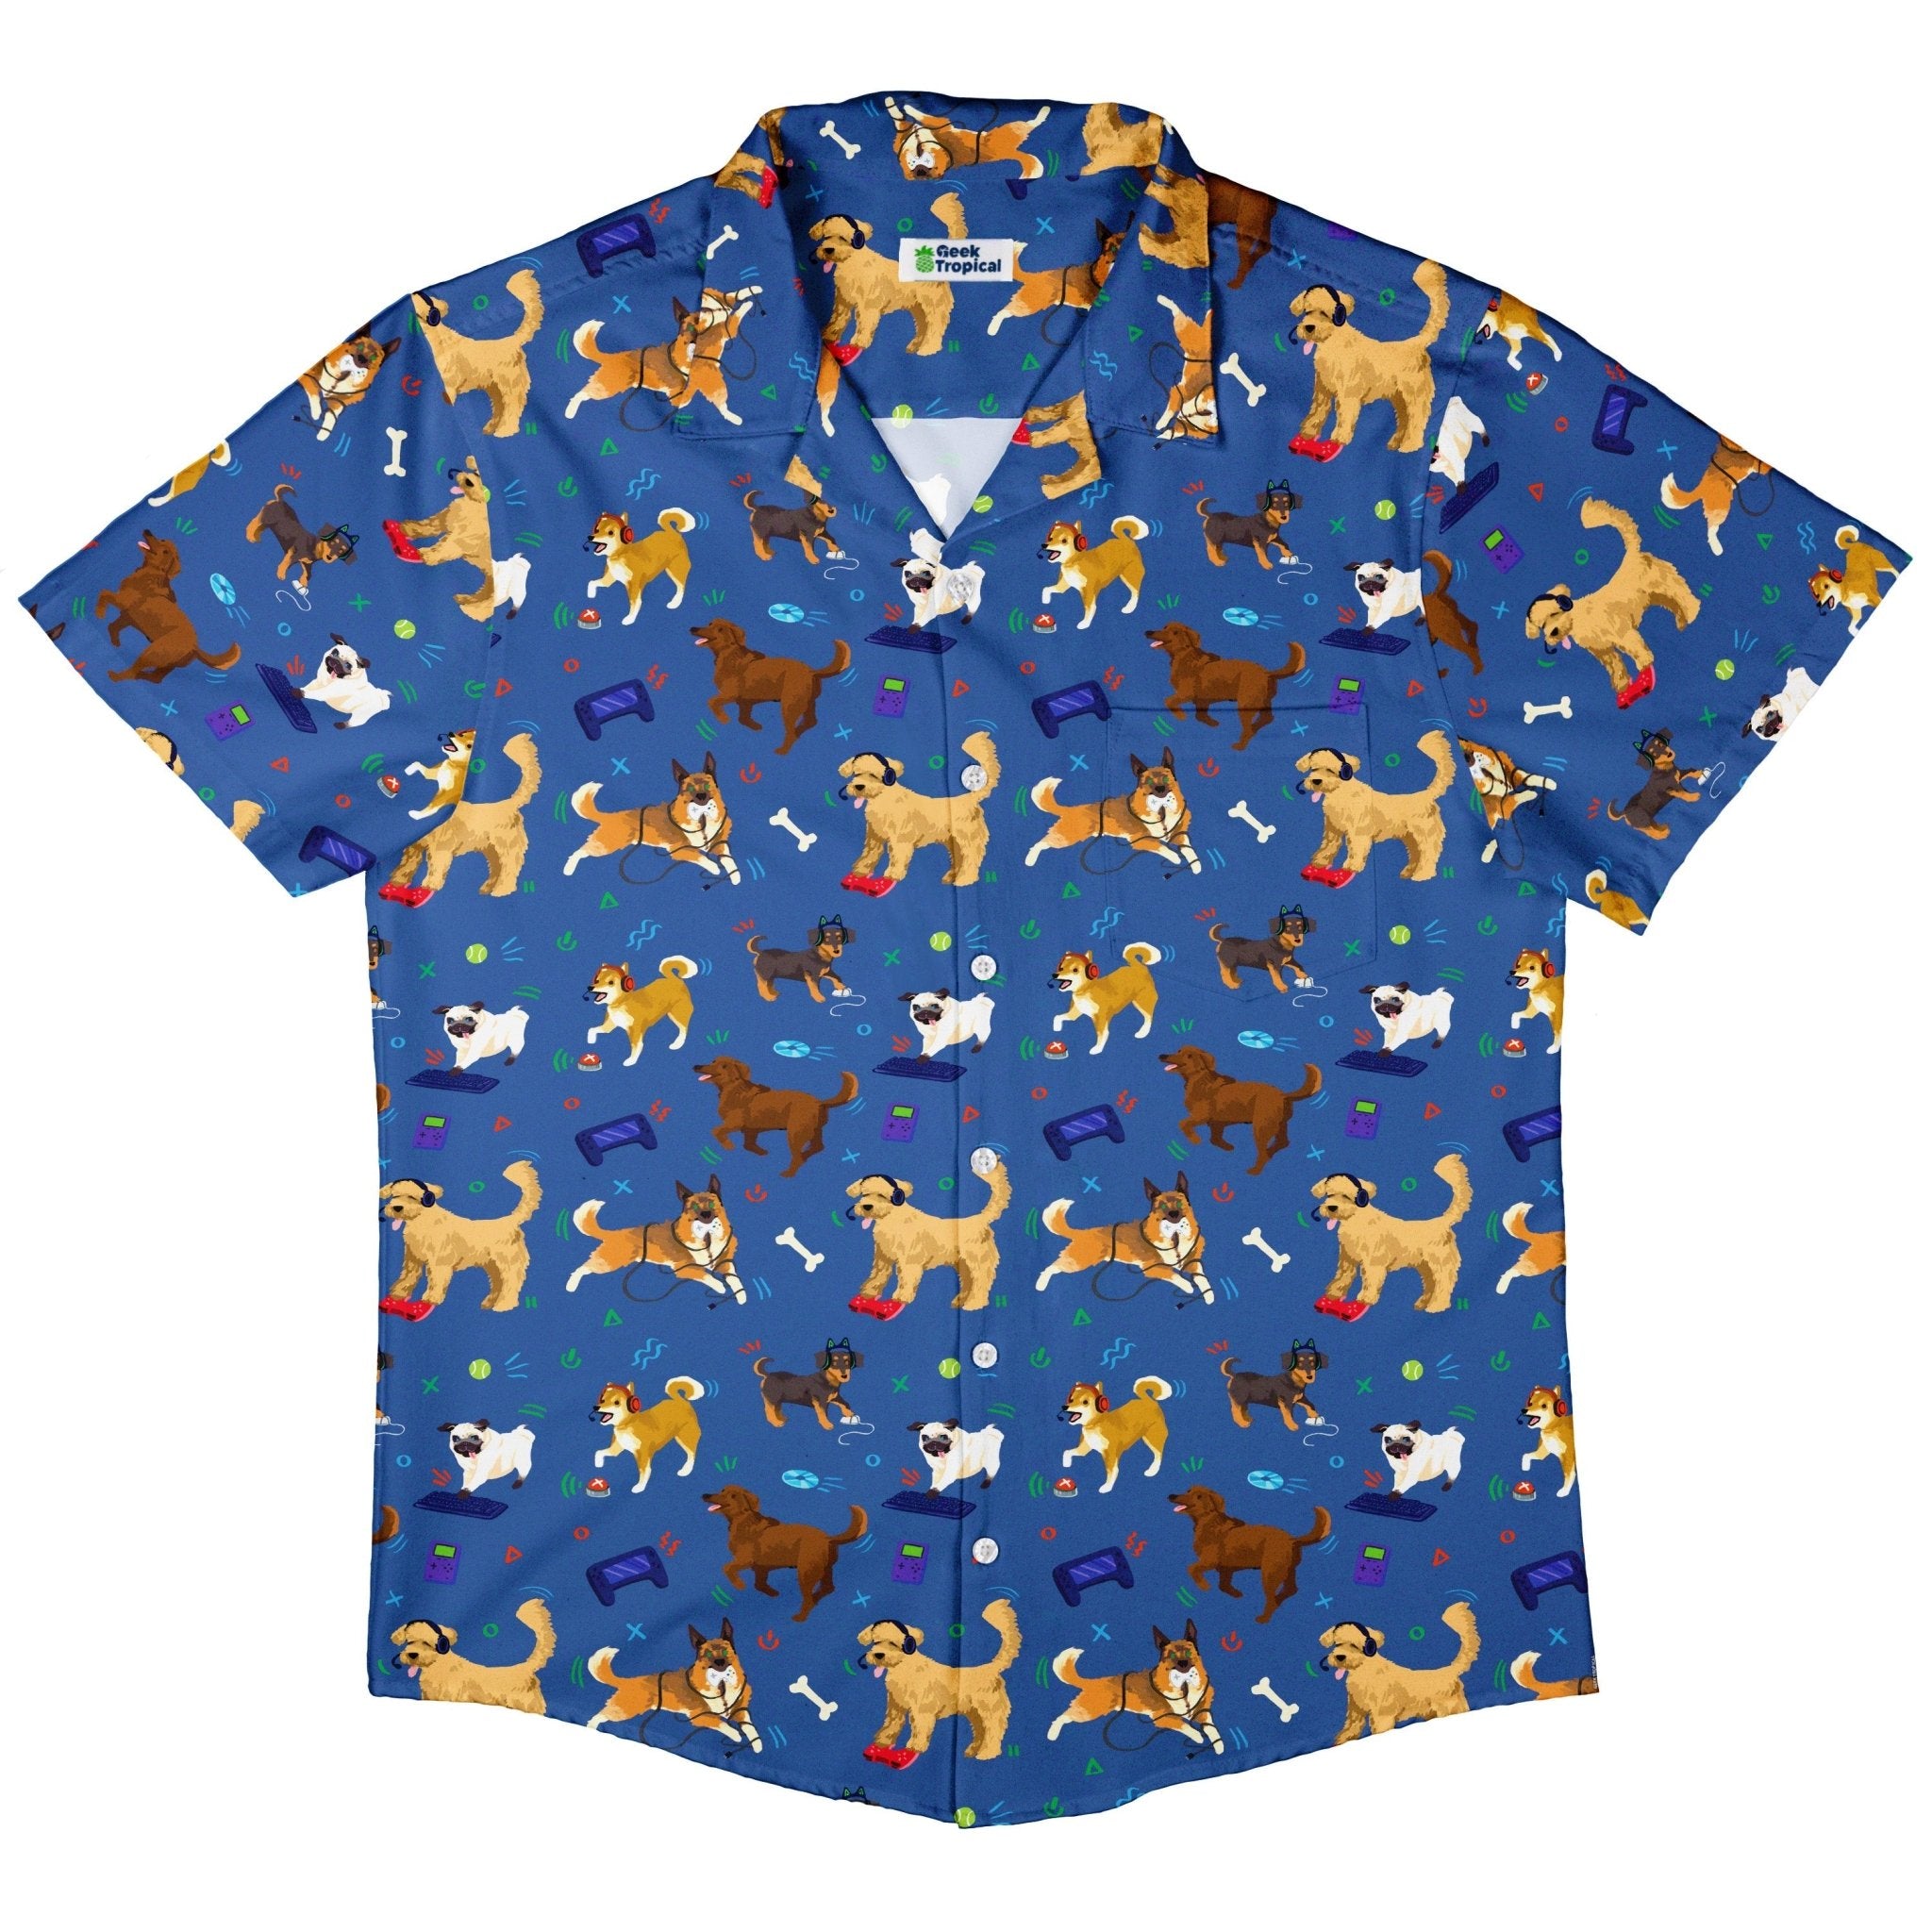 Video Game Dogs Light Button Up Shirt - adult sizing - Animal Patterns - Design by Claire Murphy